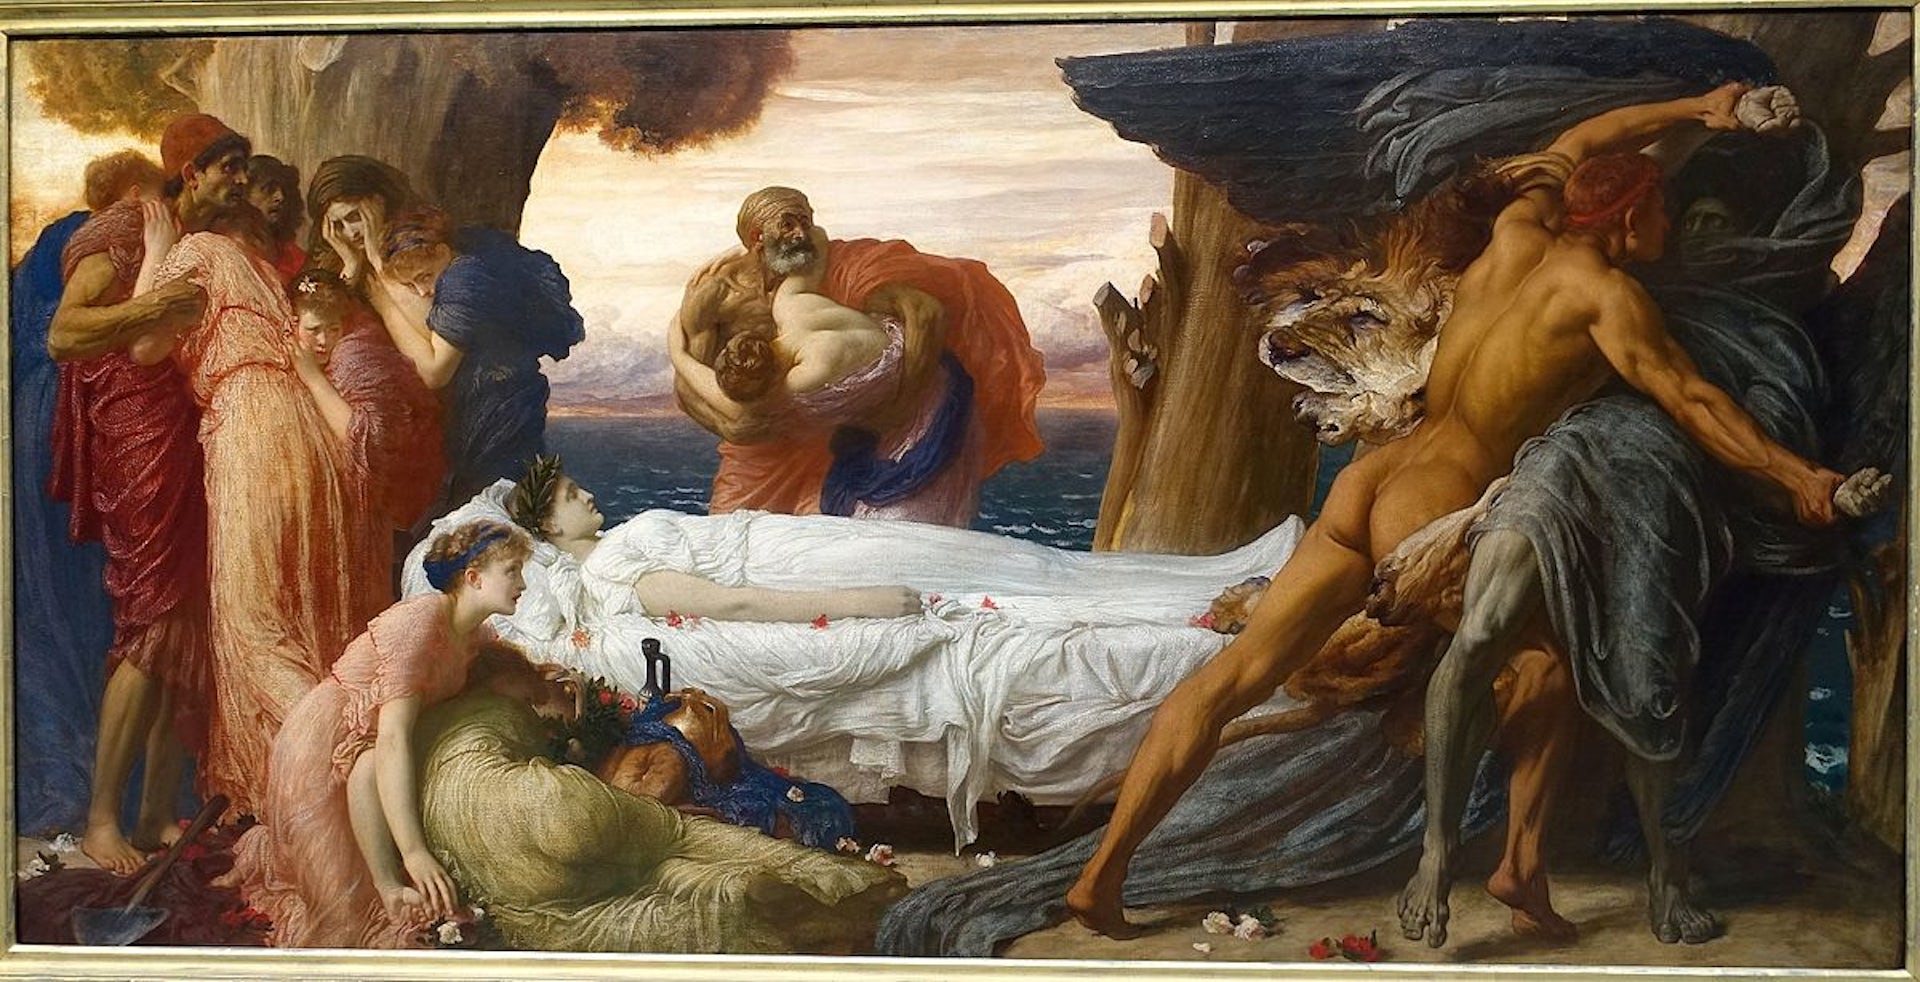 Hercules Wrestling with Death for the Body of Alcestis by Frederic Lord Leighton